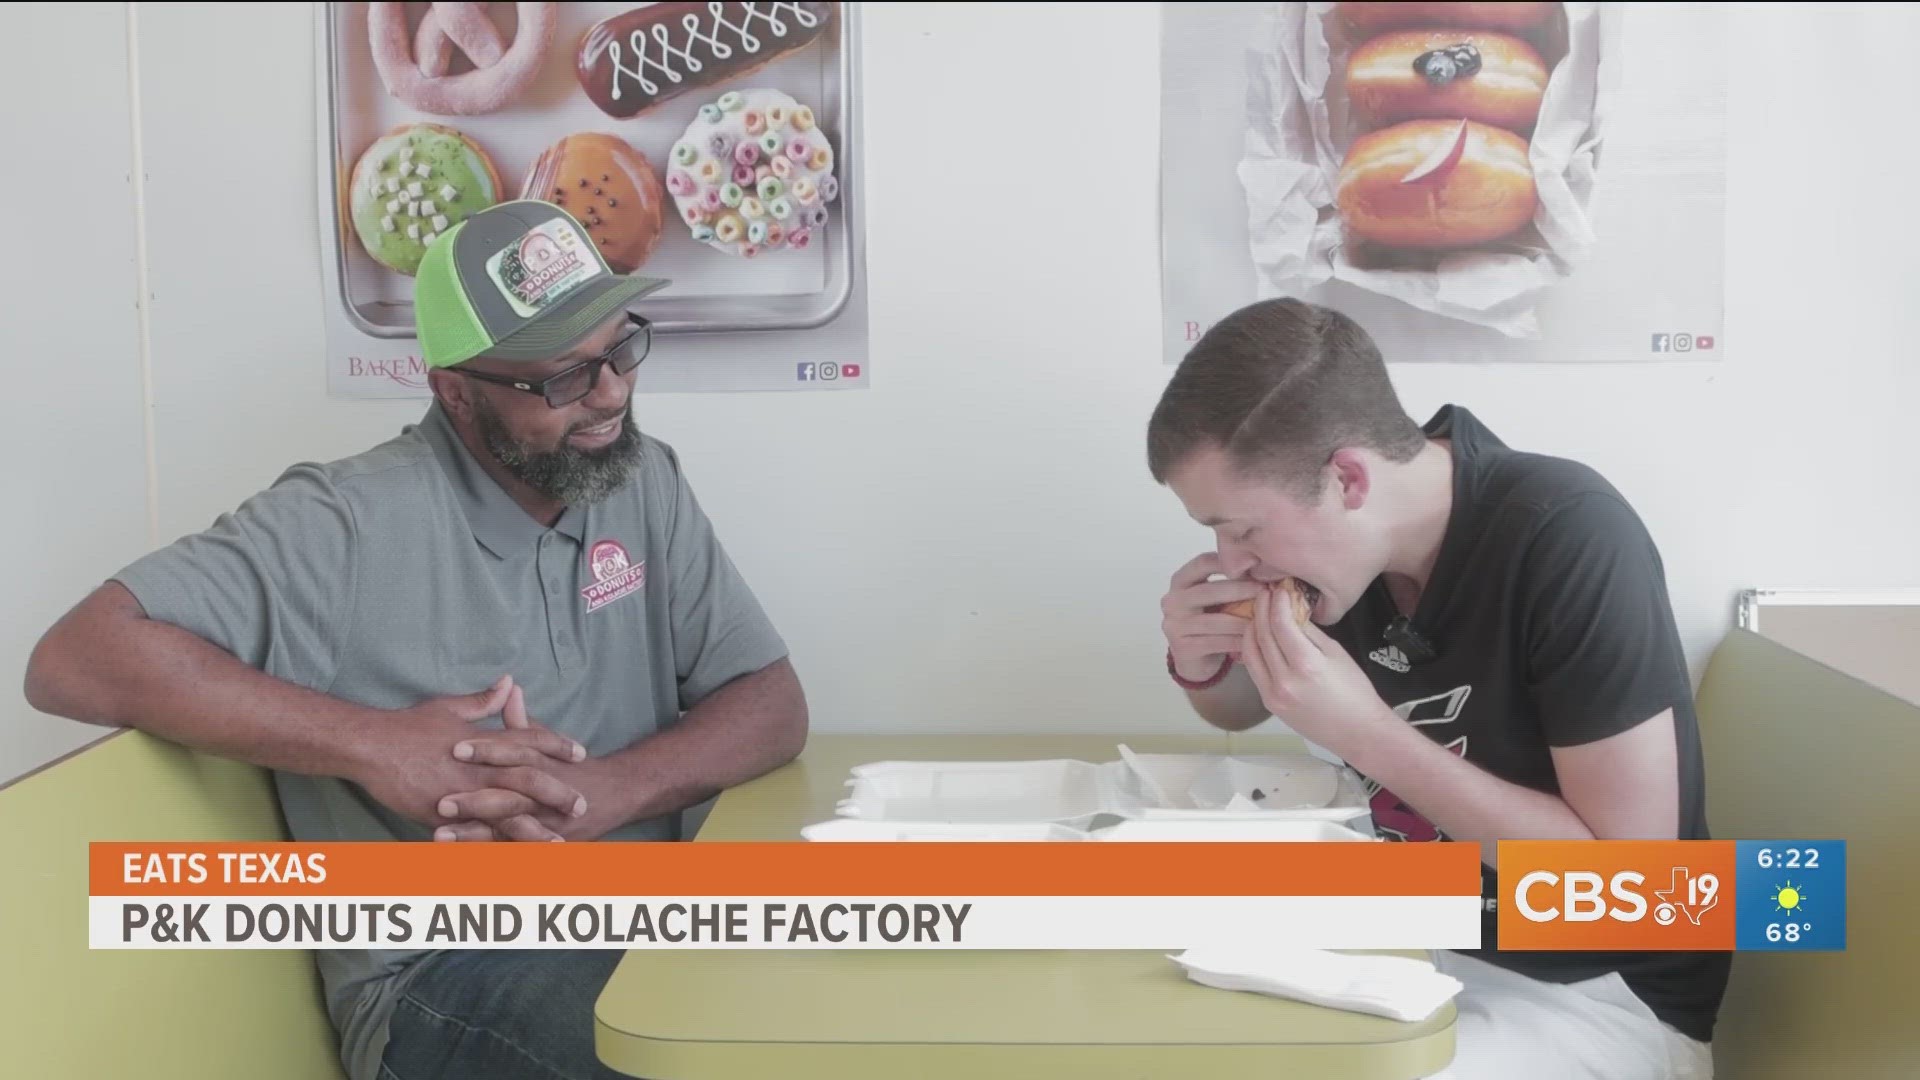 This week, we venture over to P&K Donuts and Kolaches in Tyler.